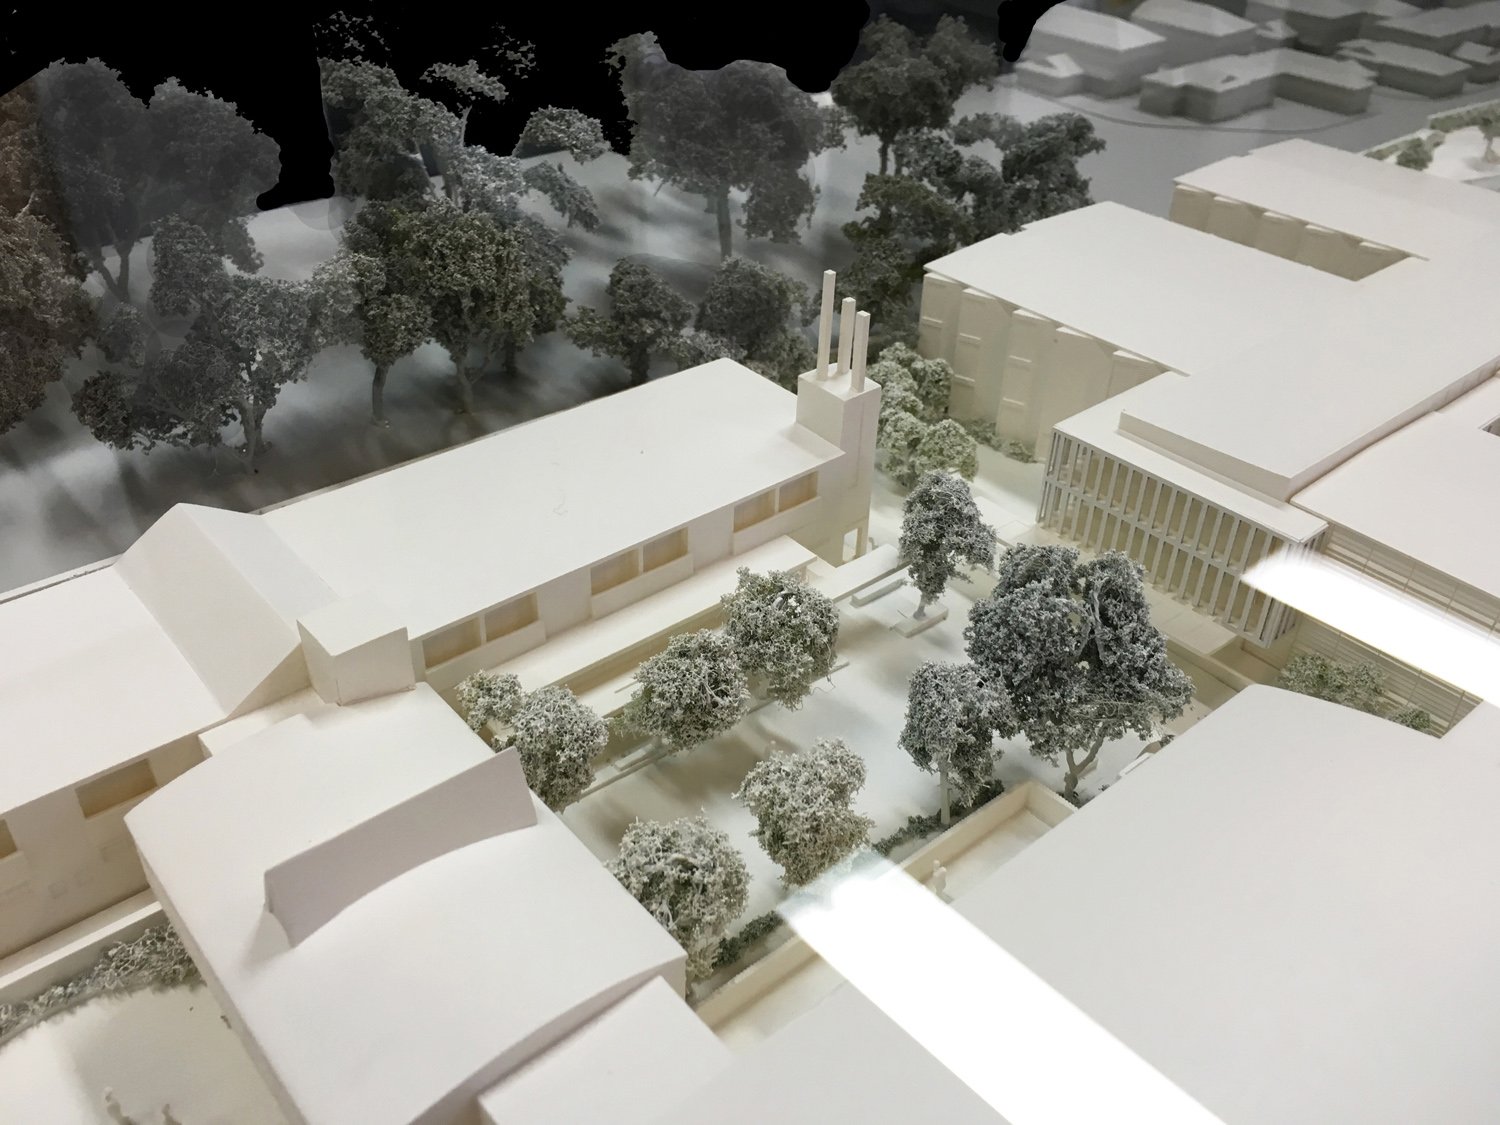 Village Square, Chapel and Residential Aged Care (model) | Kink Studio